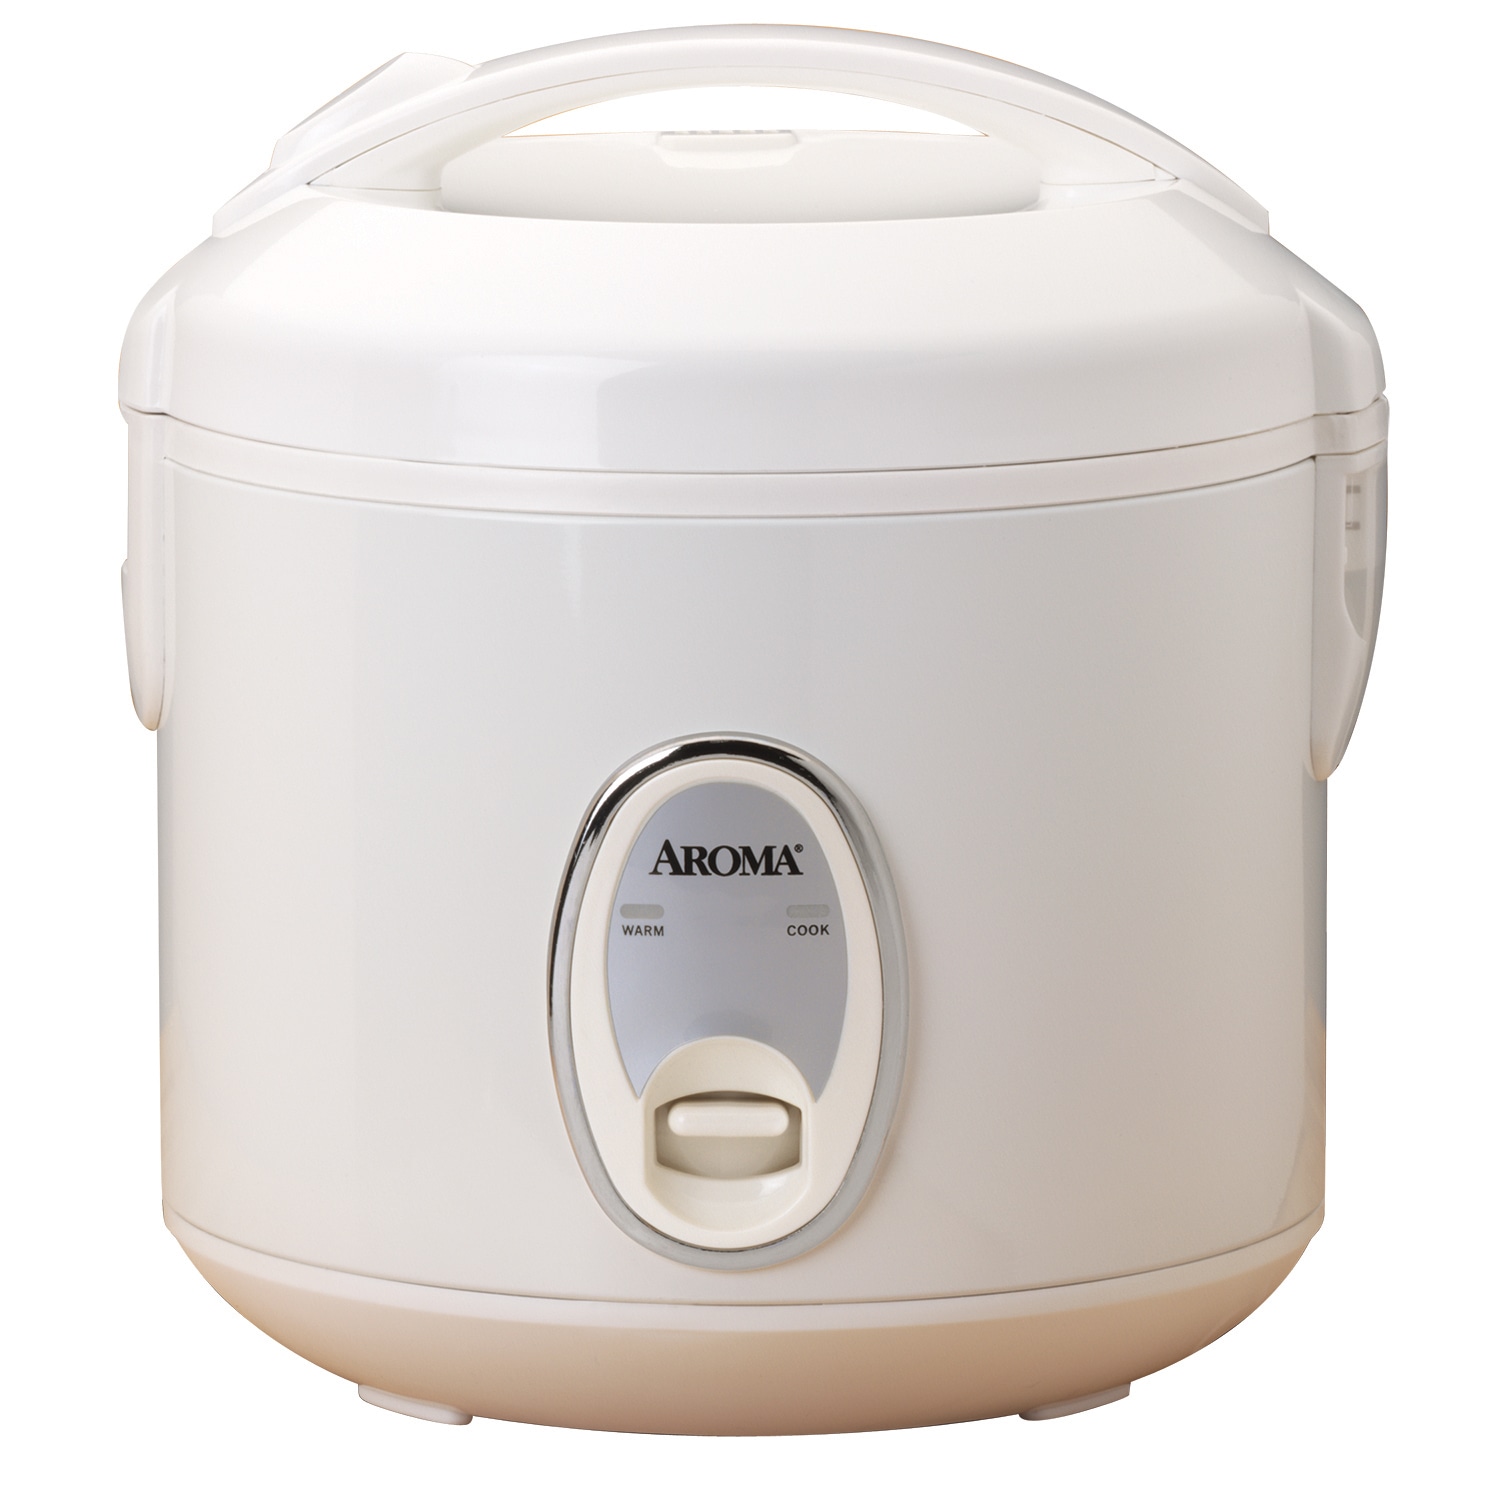 BLACK+DECKER 3-Cup Electric Rice Cooker with Keep-Warm Function, White